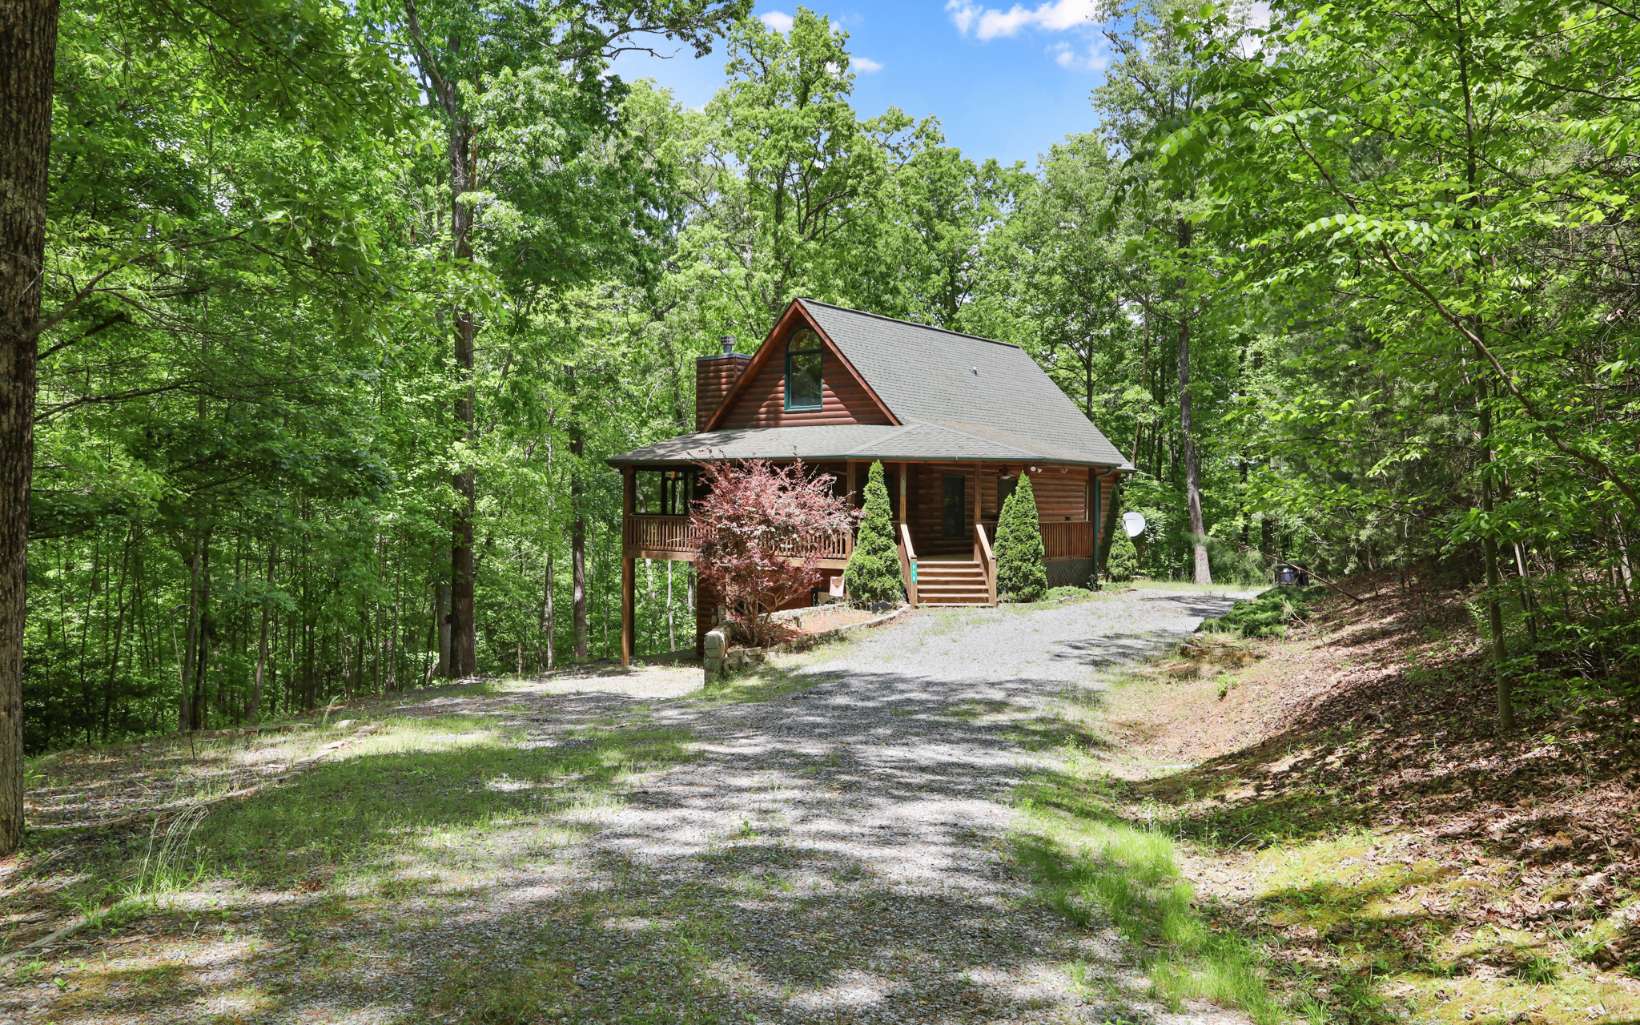 PRICED TO SELL! Here's your opportunity to own a Real Log Cabin sitting on 2.02 ac and FURNISHED! 4 bdrm plus a sleeping Loft, 3 baths, open floor plan w/ great rm, kit and dining rm. Gorgeous dry-stacked rock fireplace, hardwood floors throughout, screened in porch, wrap around deck, laundry on main level, basement garage for parking or storage and wired for back up generator ! Tons of parking space and seasonal Mtn views! Great rental potential or perfect investment for weekend get-a-ways ! Super close to fishing on Fighting town Creek, shopping in downtown McCaysville and Blue Ridge, boating on Blue Ridge Lake, Hiking on Aska Adventure Trails as well as rafting down the Ocoee Whitewater River or Gambling at the Casino in Murphy NC! Perfect location! It wont last long! Give me a call!